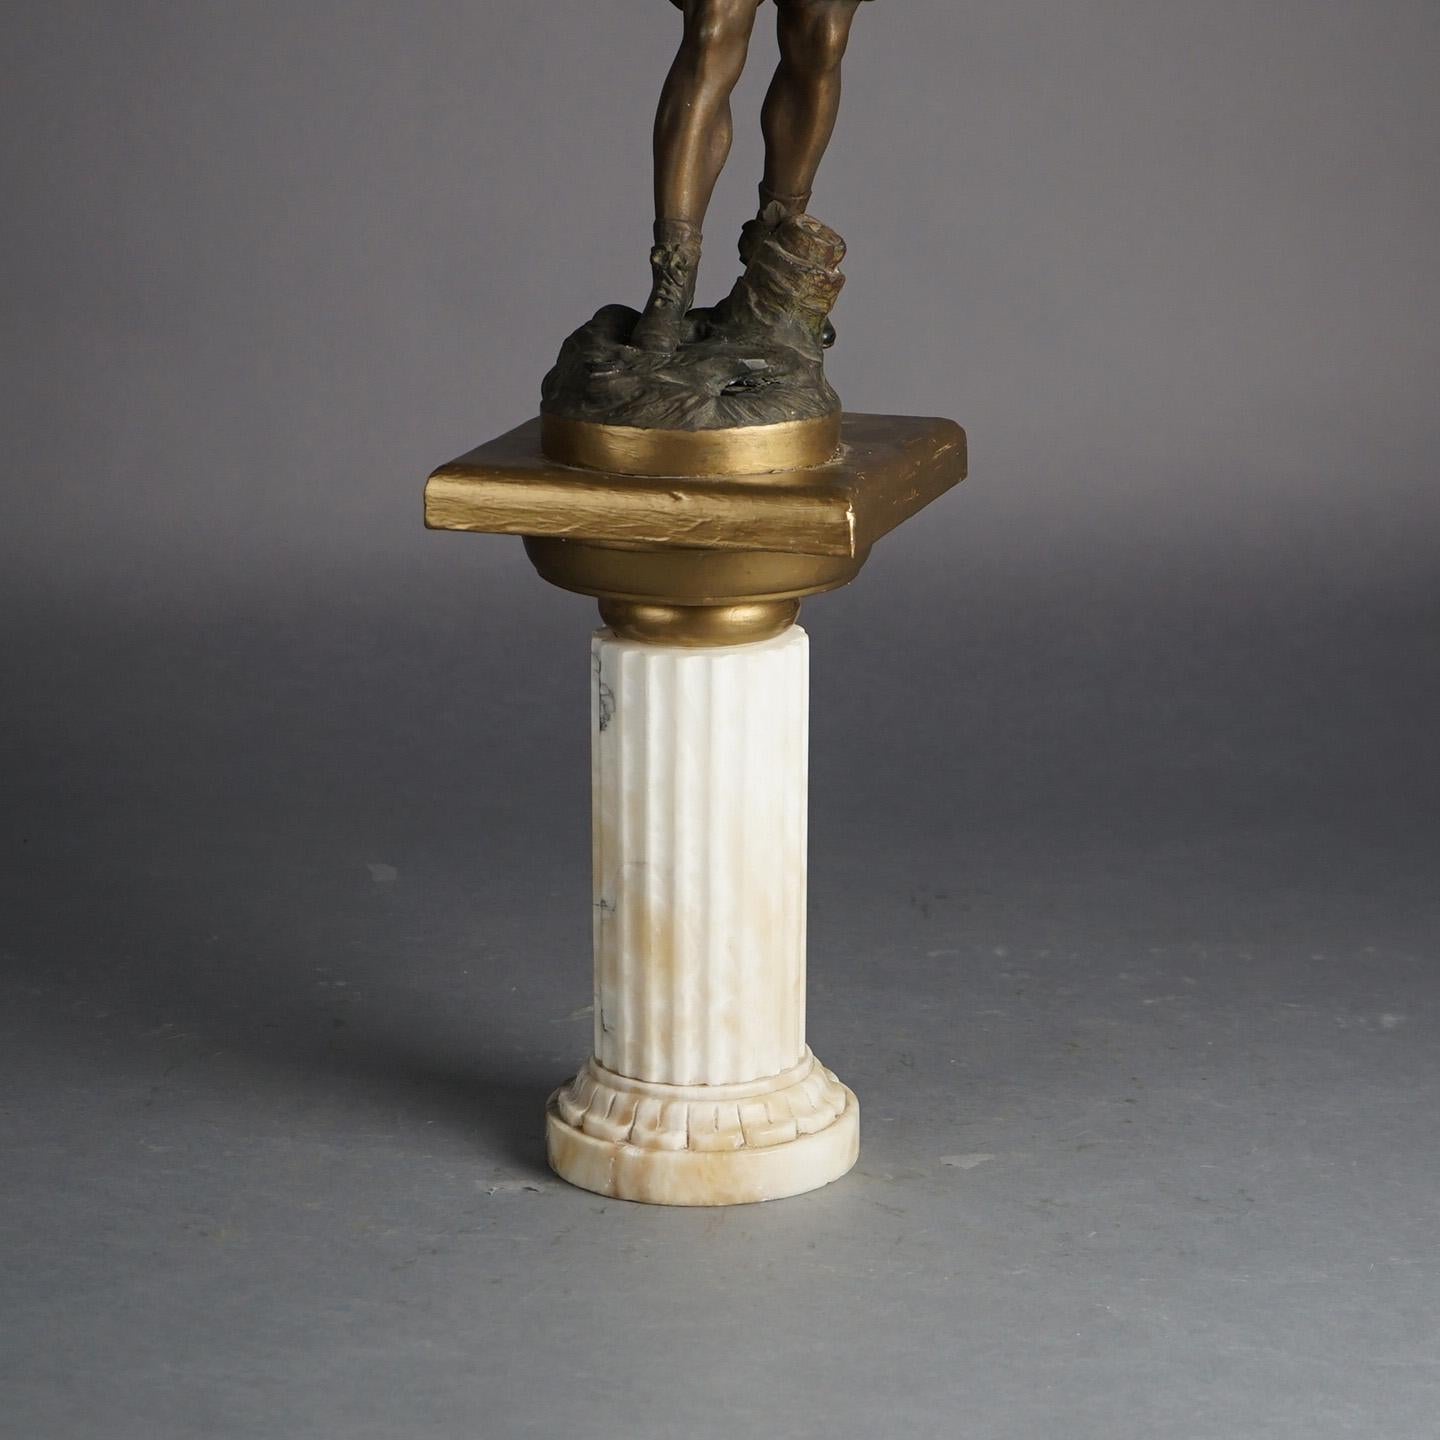 Moreau Bronzed Metal Foot Player Statue on Marble Fluted Column C1900 For Sale 6